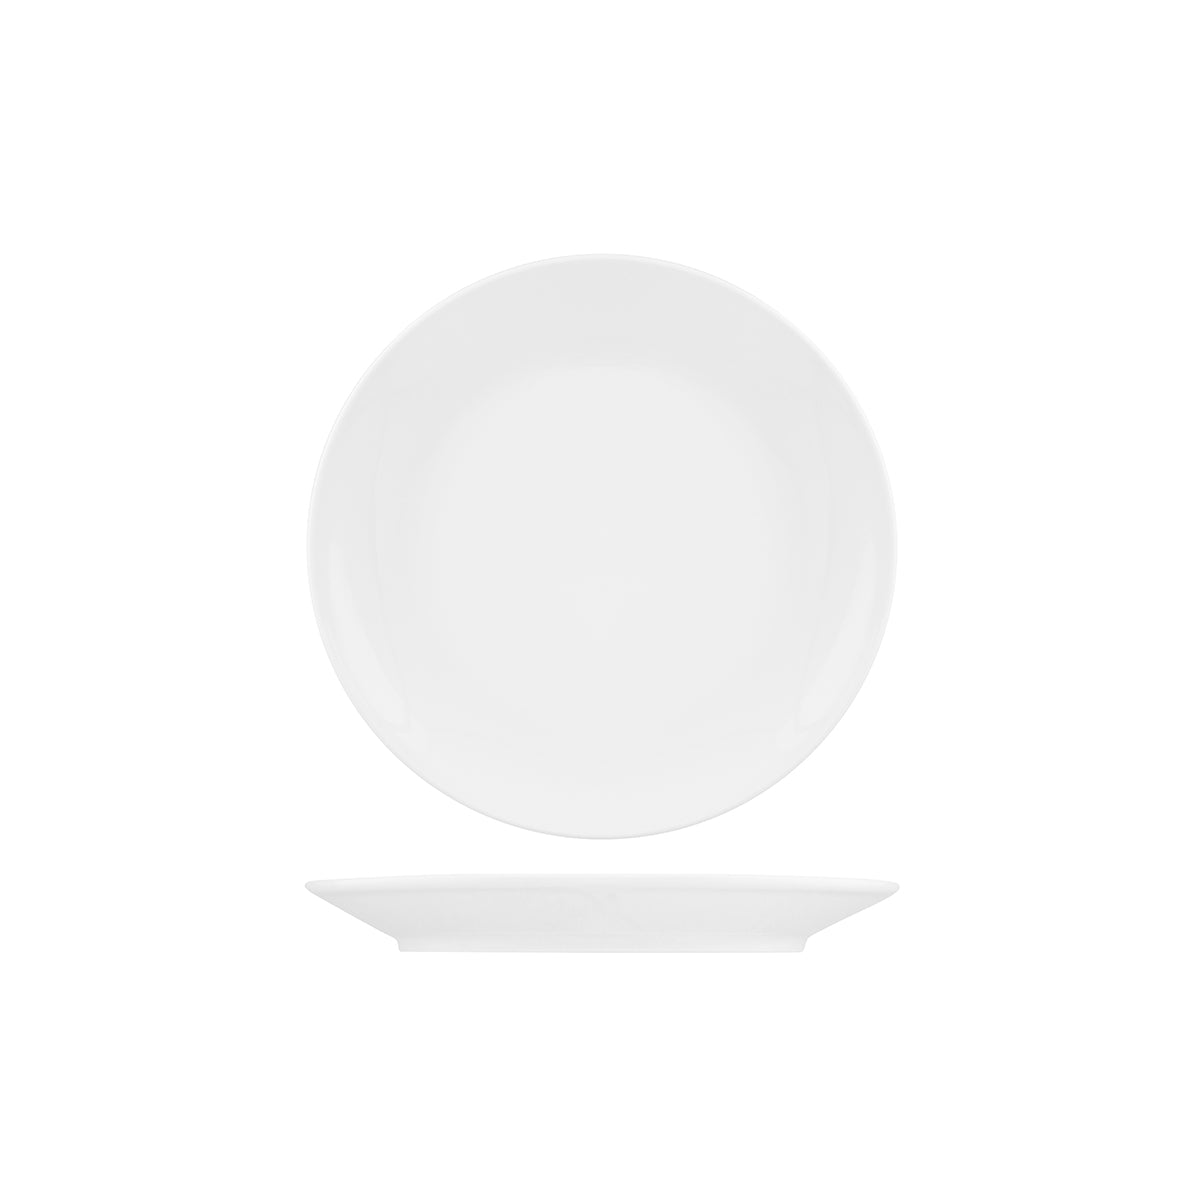 94021 Royal Porcelain Chelsea Round Plate Coupe 290mm (0247) Tomkin Australia Hospitality Supplies